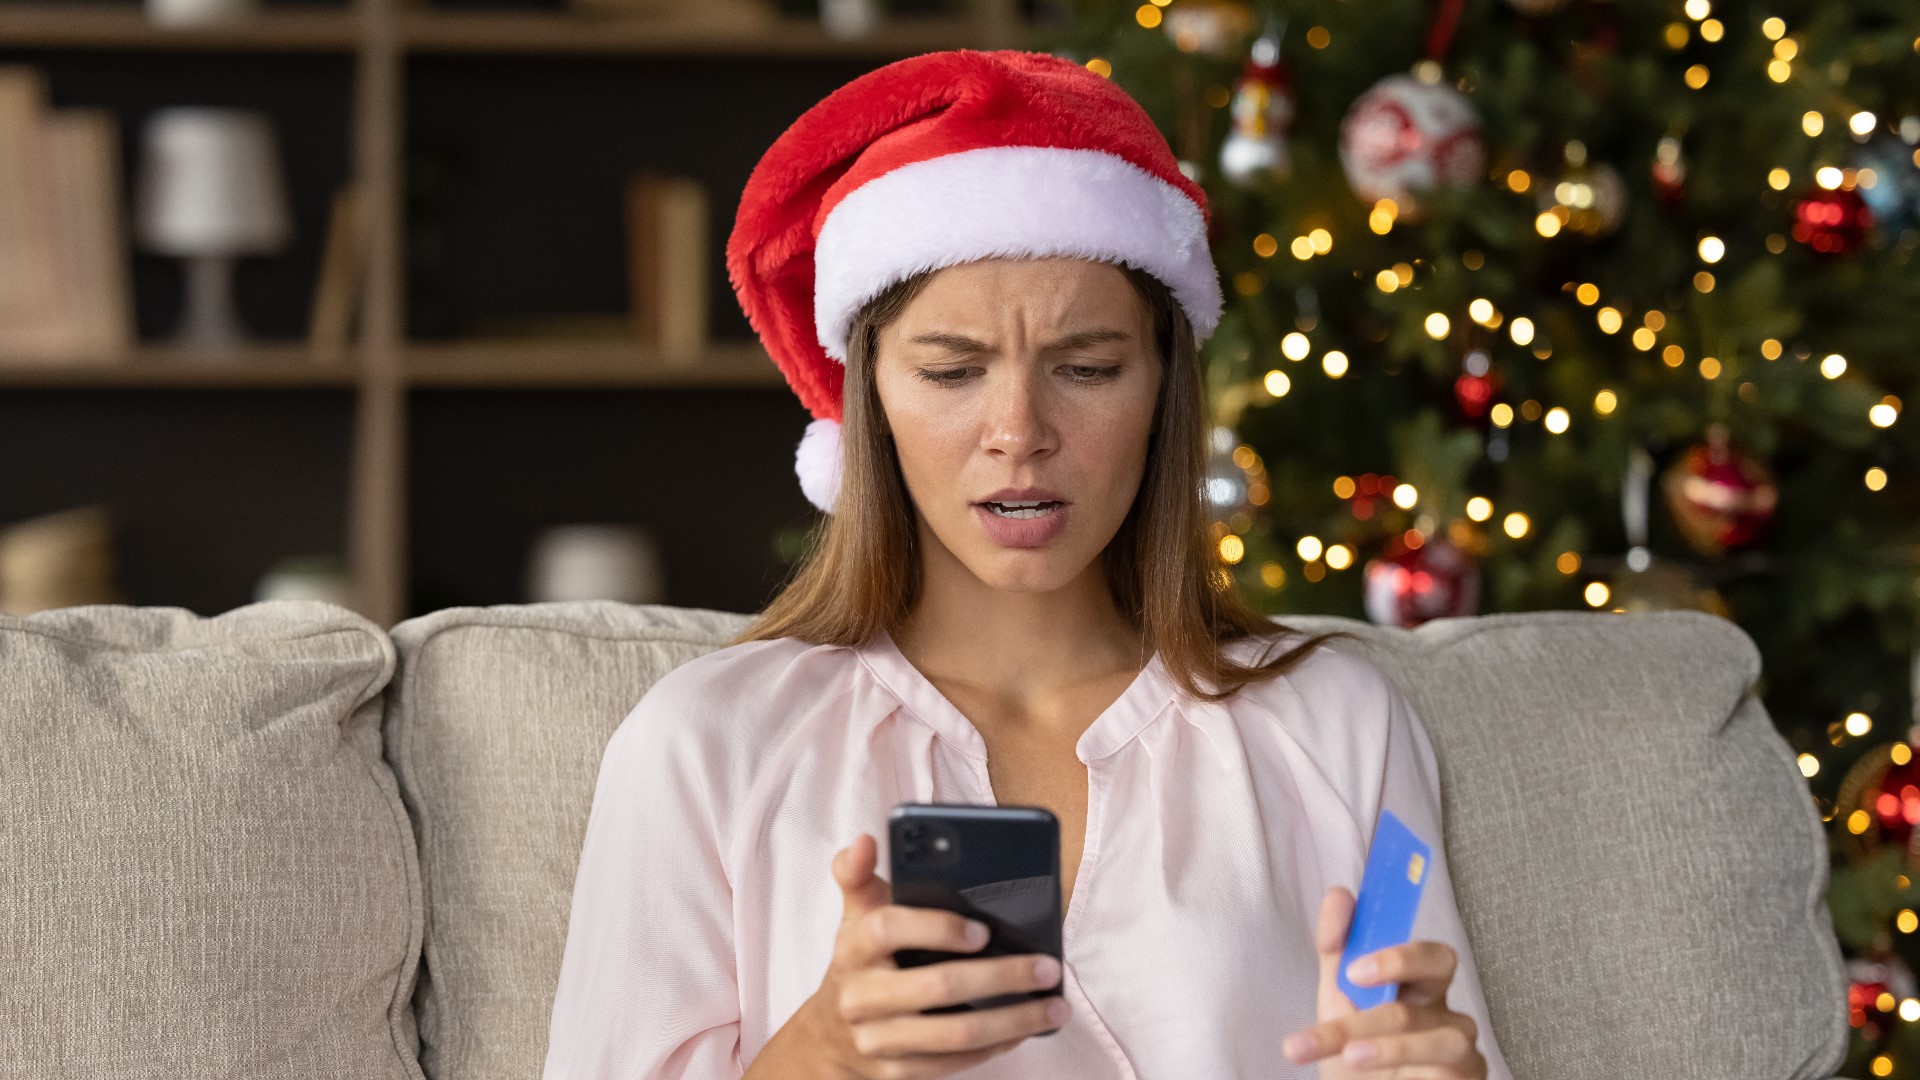 One scam in particular is seeing a 500% increase this year, and experts believe it will get even worse heading into the holidays.